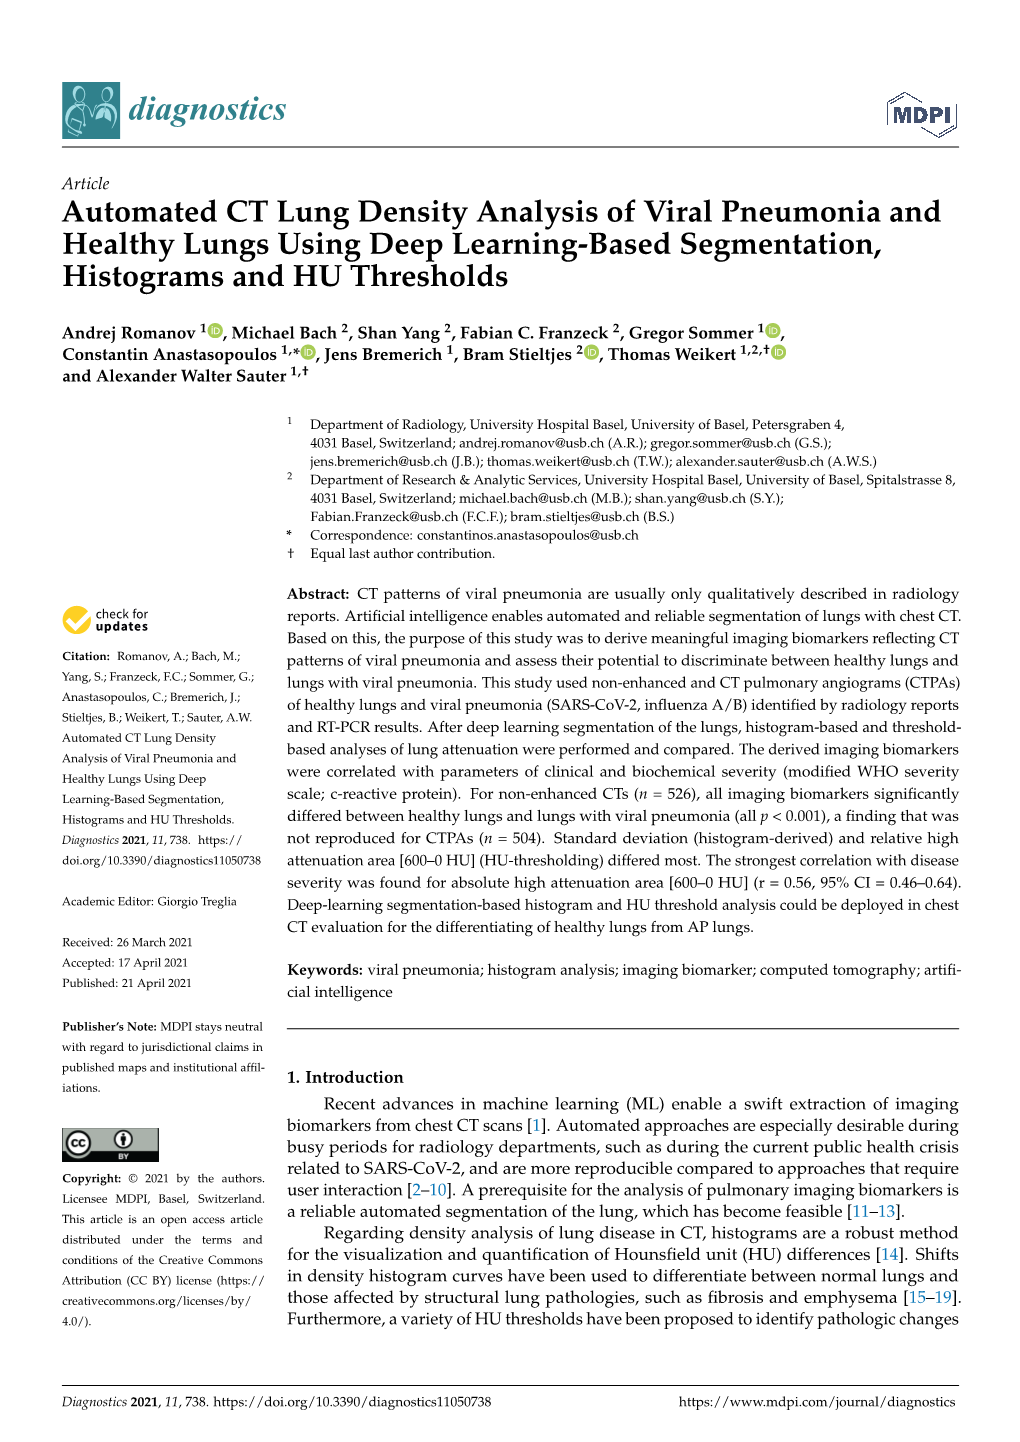 Automated CT Lung Density Analysis of Viral Pneumonia and Healthy Lungs Using Deep Learning-Based Segmentation, Histograms and HU Thresholds